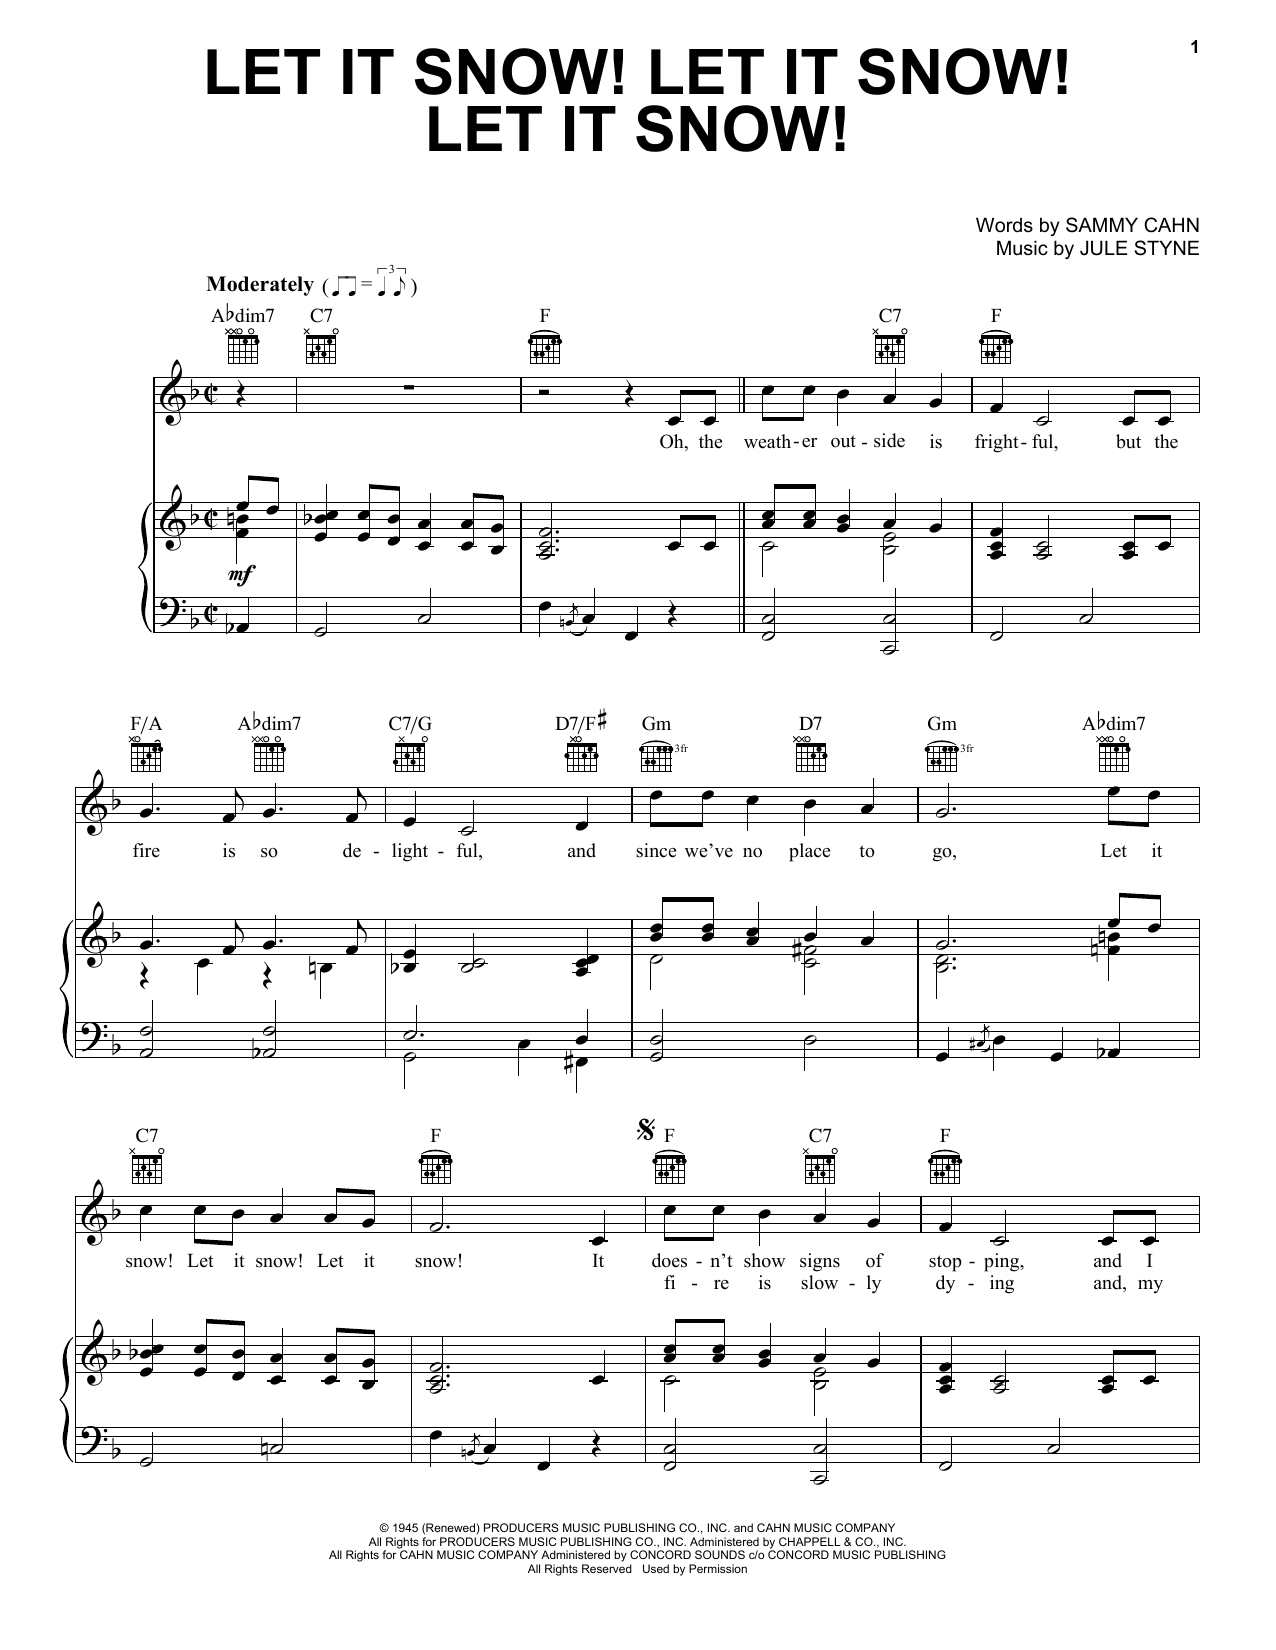 Download Sammy Cahn Let It Snow! Let It Snow! Let It Snow! sheet music notes and chords for Piano, Vocal & Guitar (Right-Hand Melody) - Download Printable PDF and start playing in minutes.